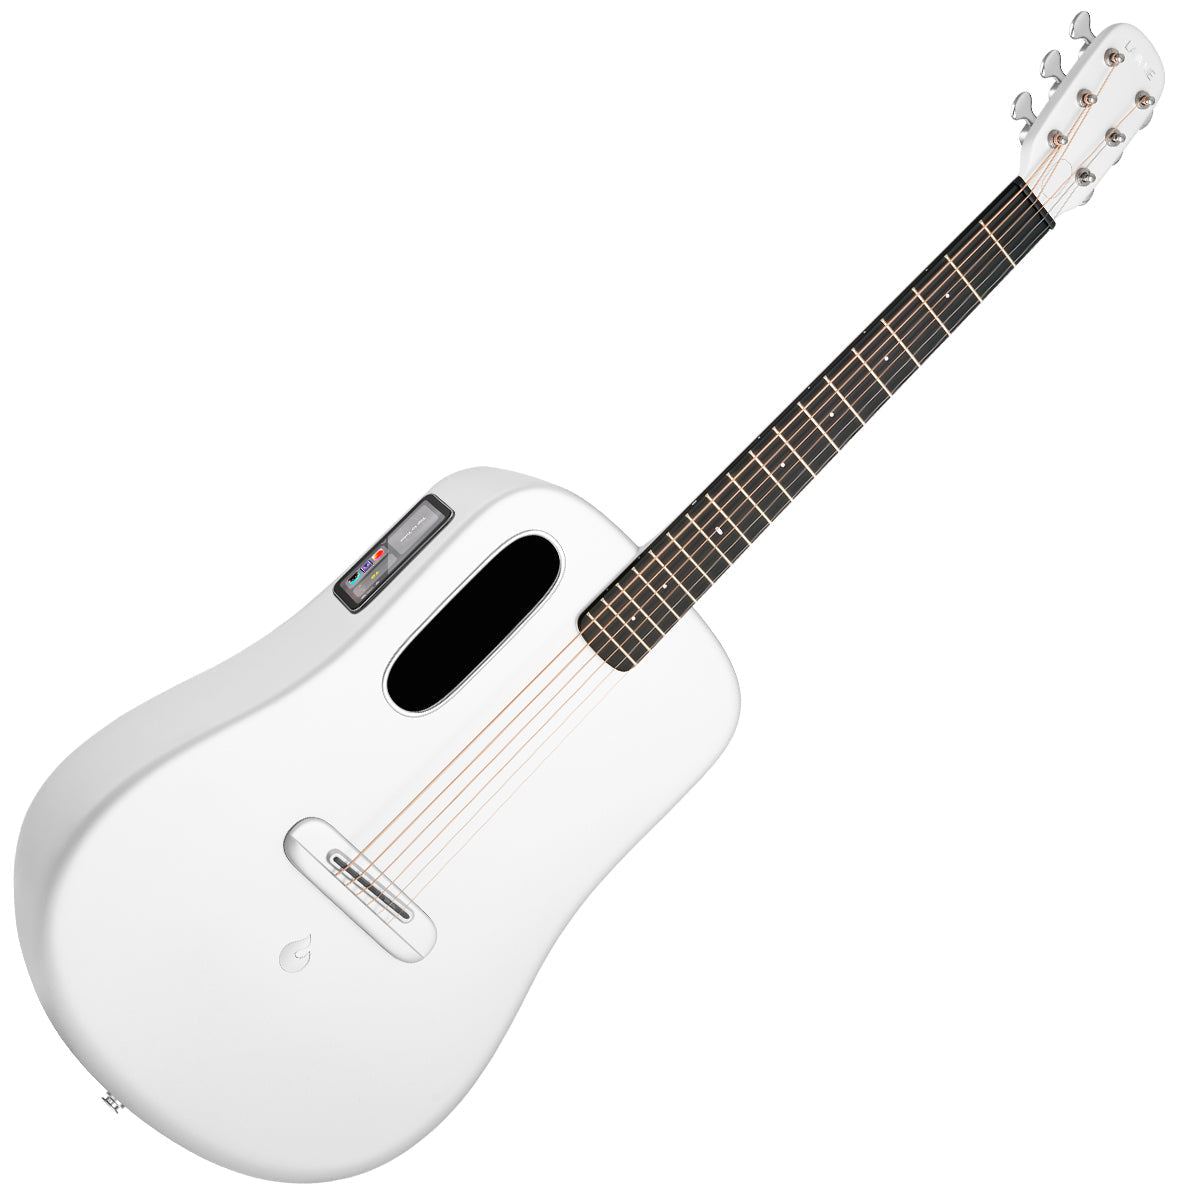 LAVA ME4 Carbon 36" with Space Bag ~ White, Acoustic Guitar for sale at Richards Guitars.